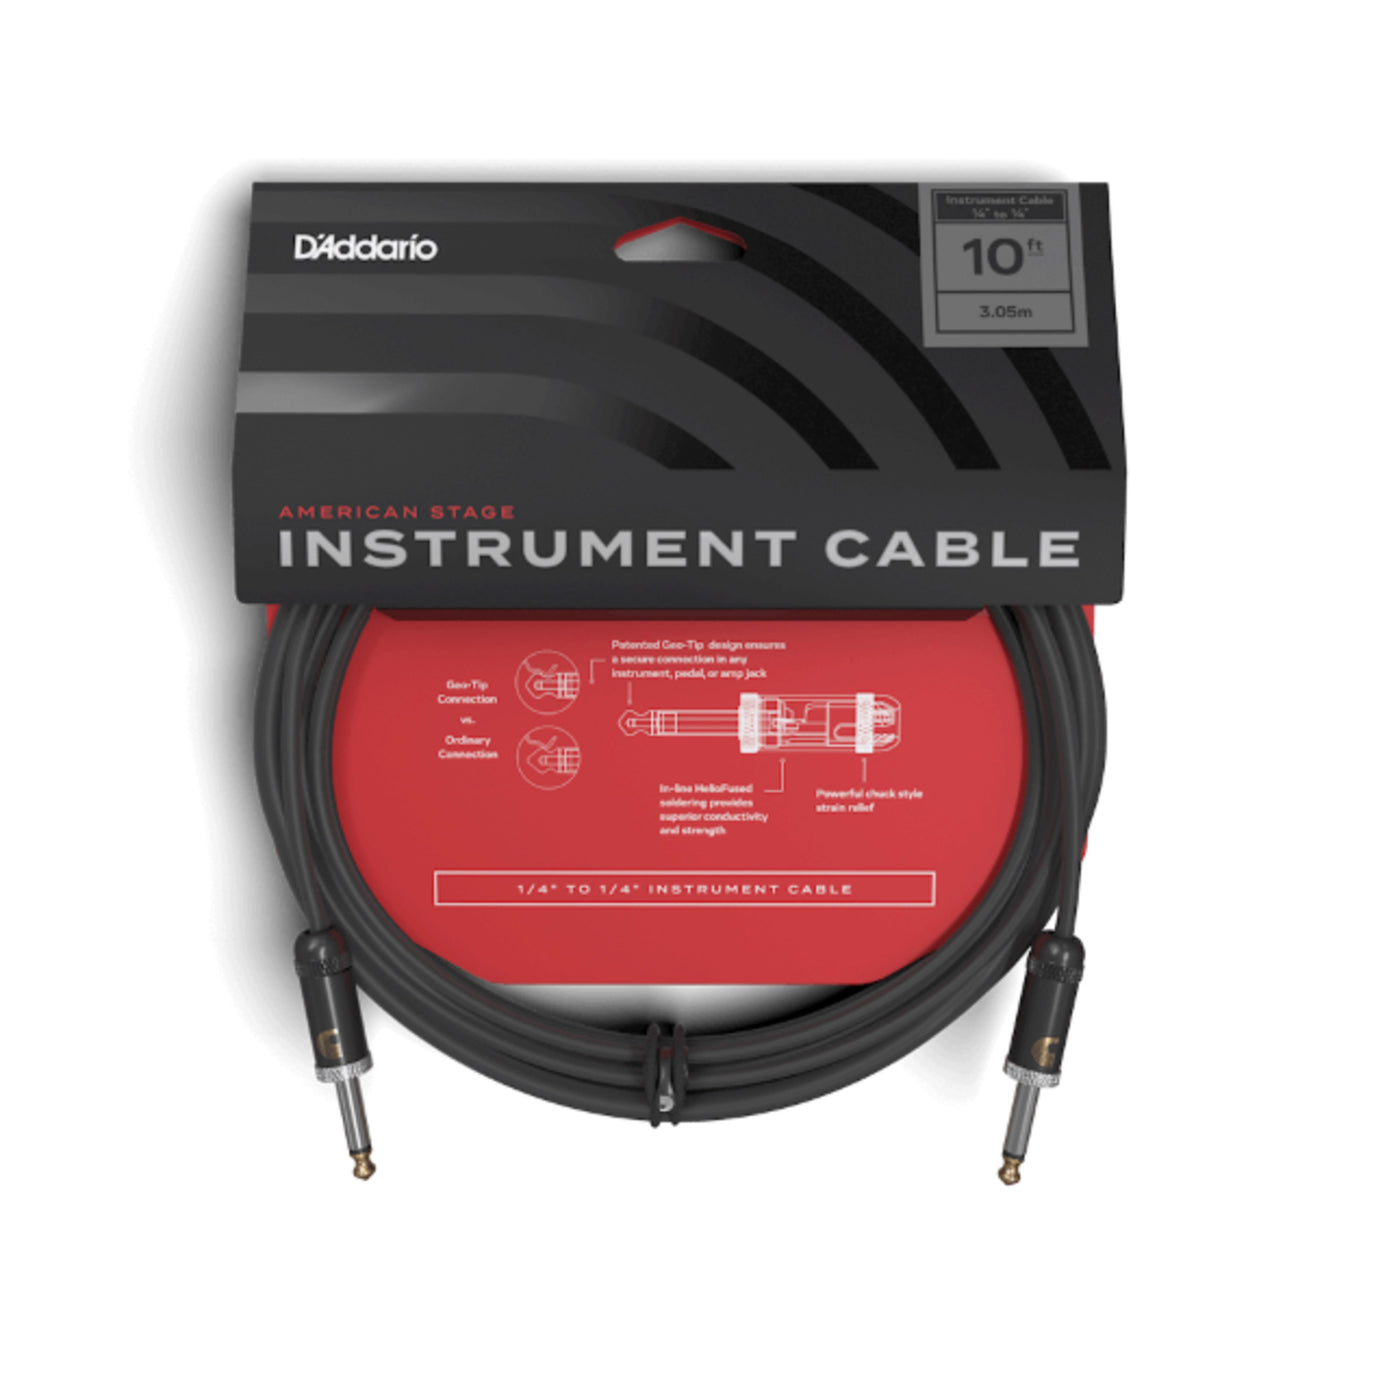 D'Addario American Stage Instrument Cable, Right to Right, 20 feet (PW-AMSGRR-20)